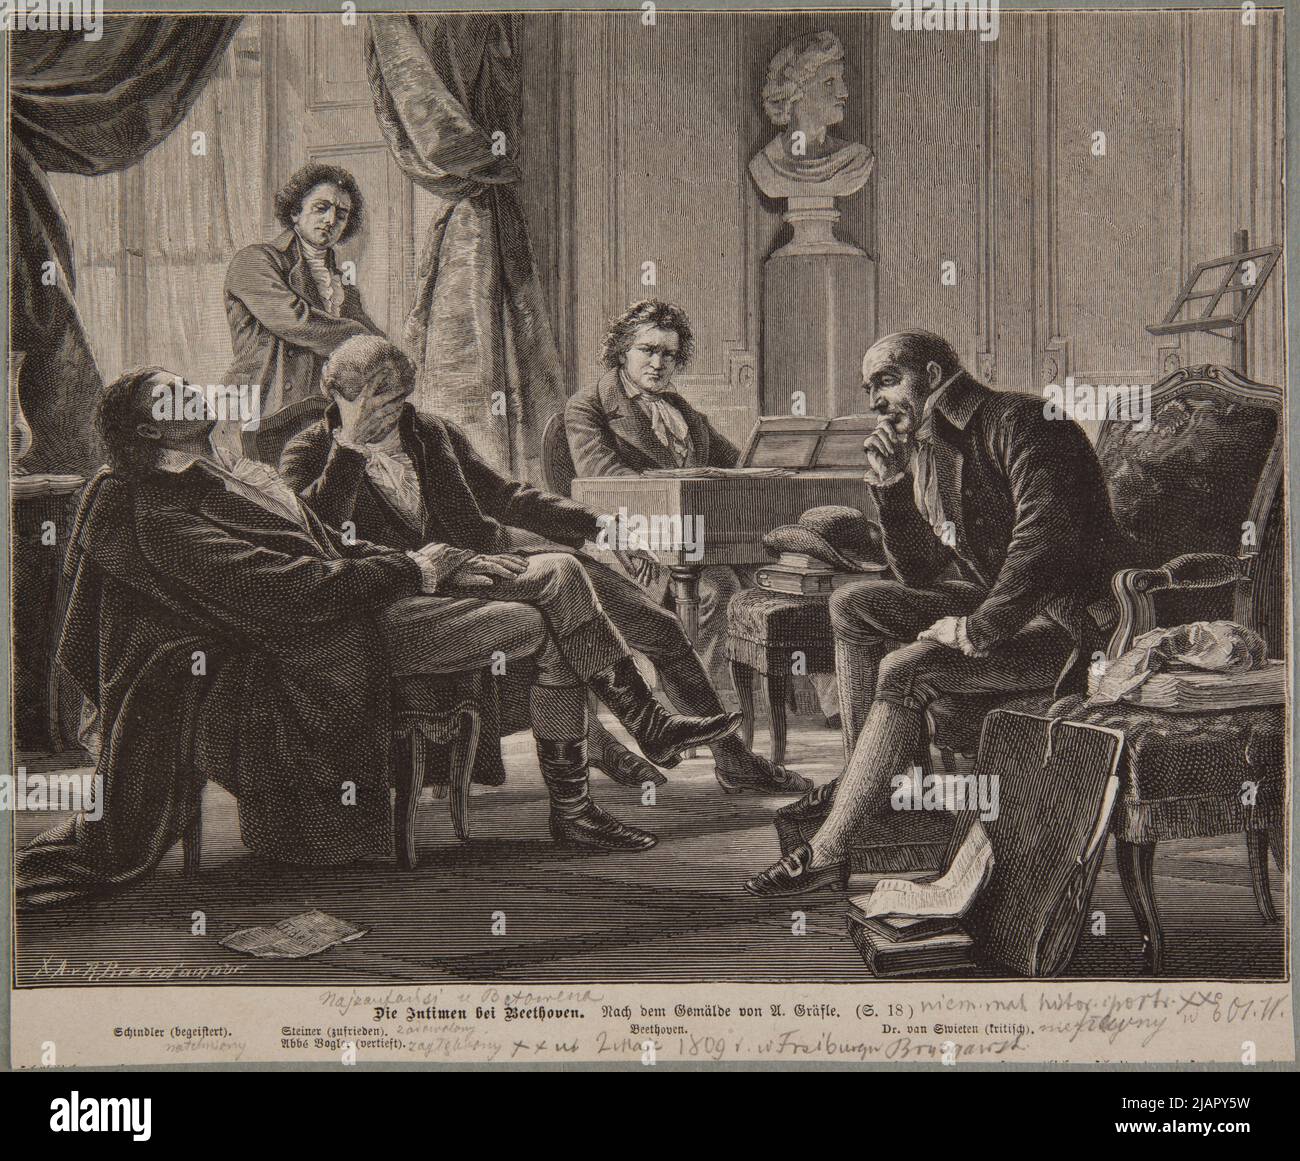 A cozy concert at Beethoven according to the image of Albert Gräfle. A clip from a German magazine. Brend'amour, Franz Robert Richard (1831 1915), albertle, albert (1807 1889) Stock Photo